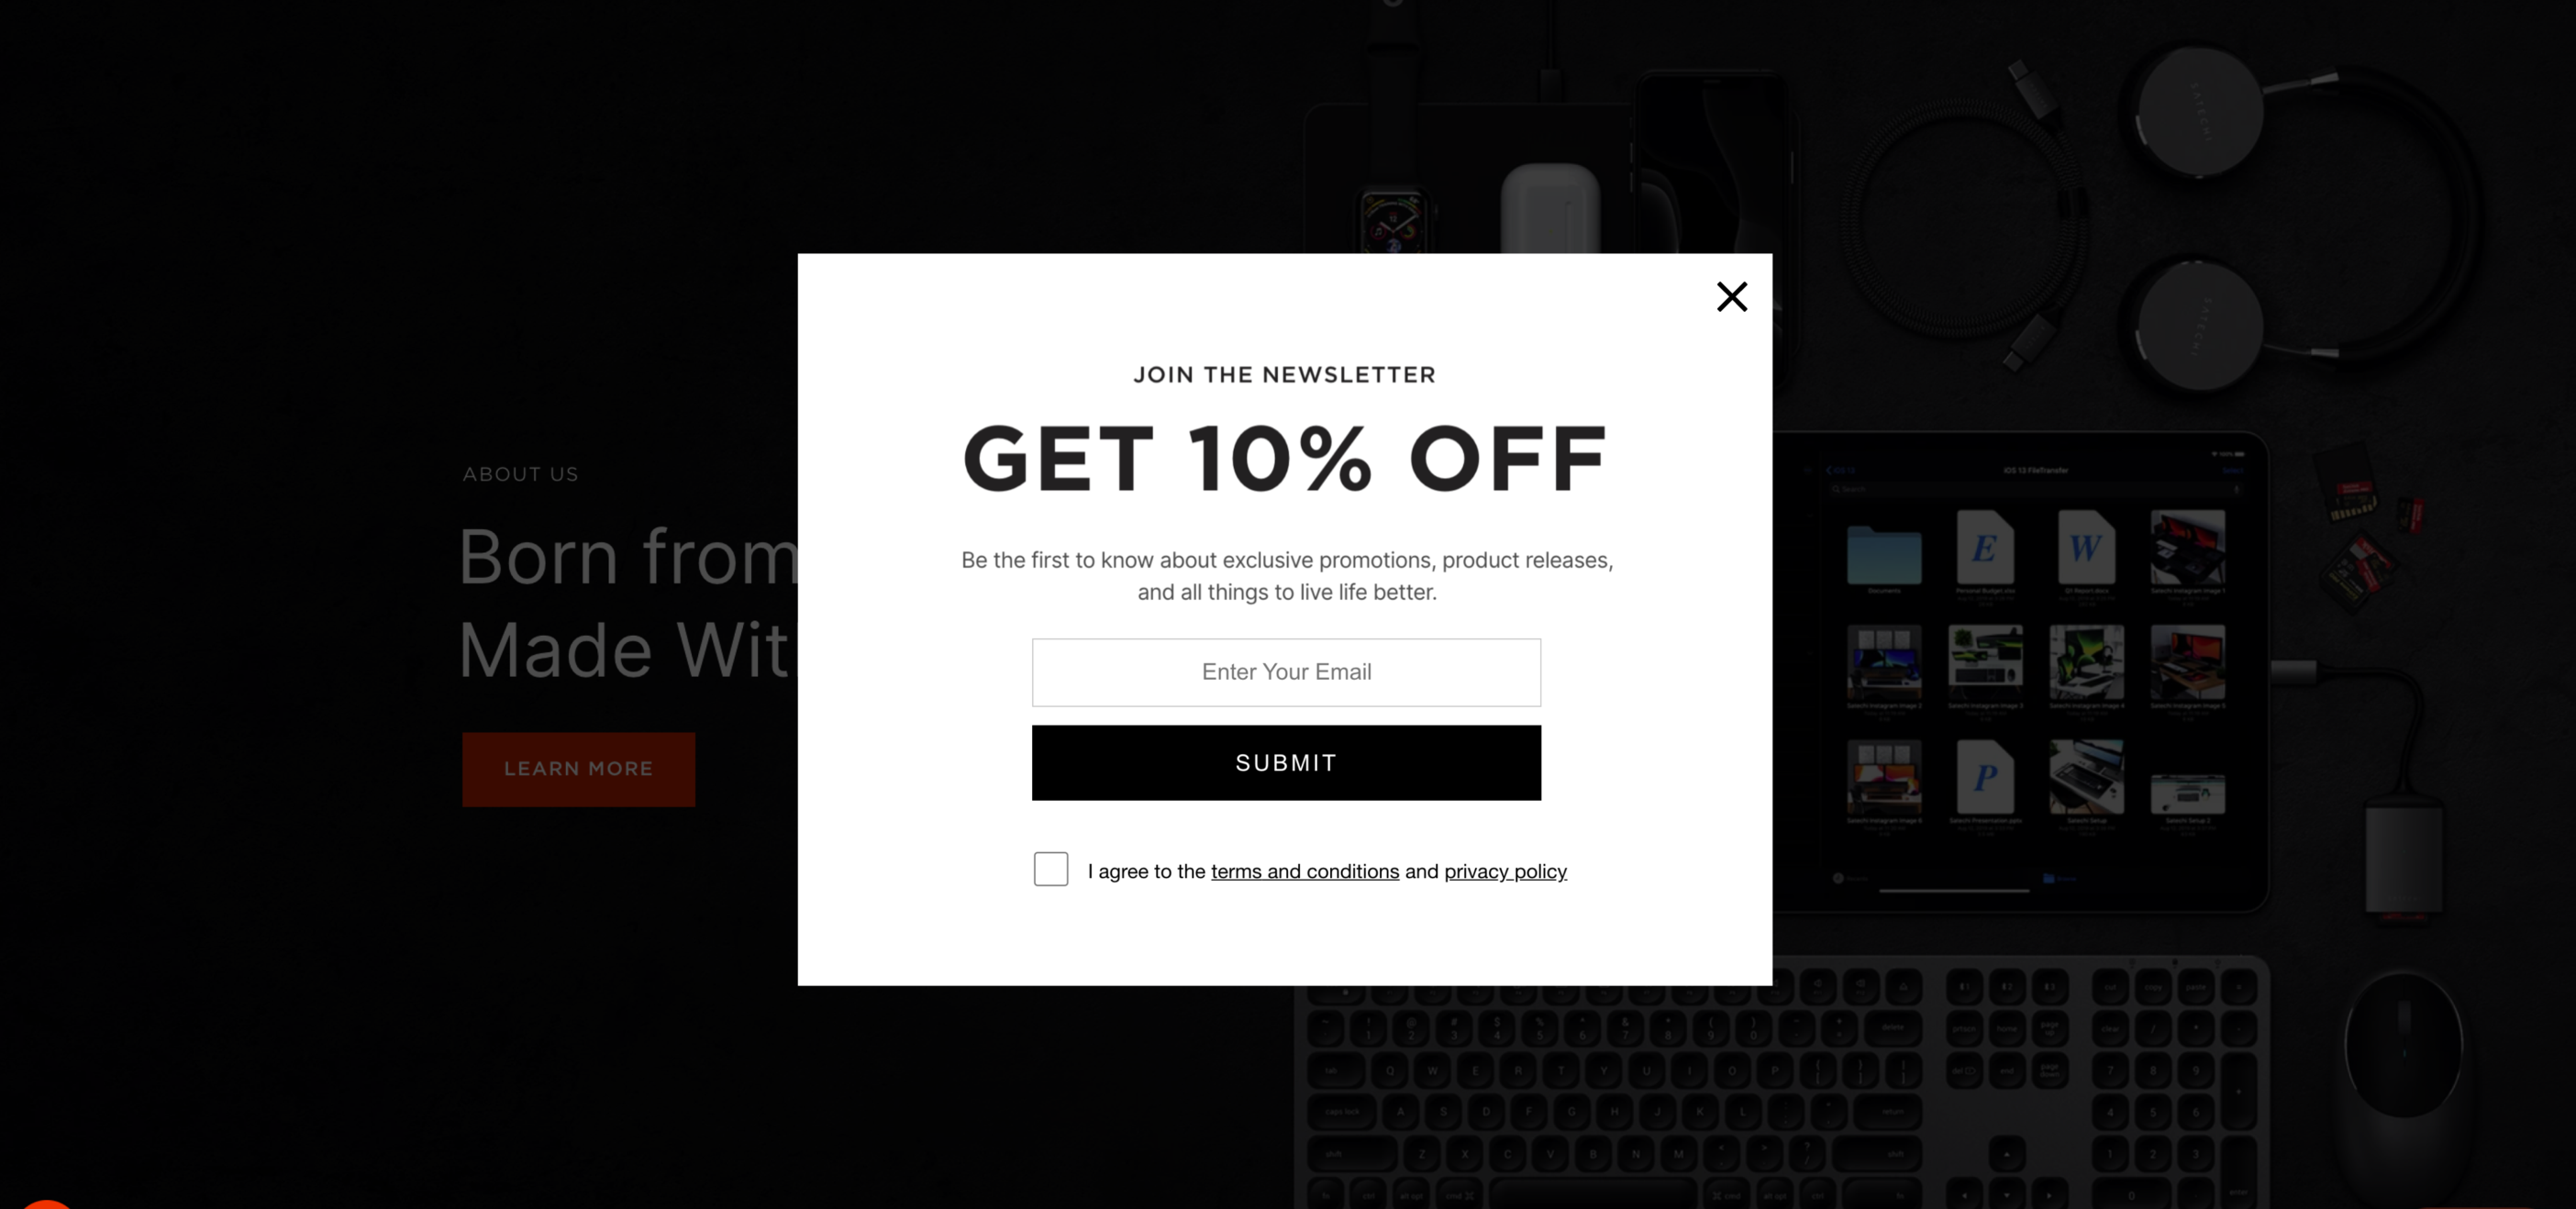 Pop-up from Satechi asking customers for their email in exchange for 10% off their first order.